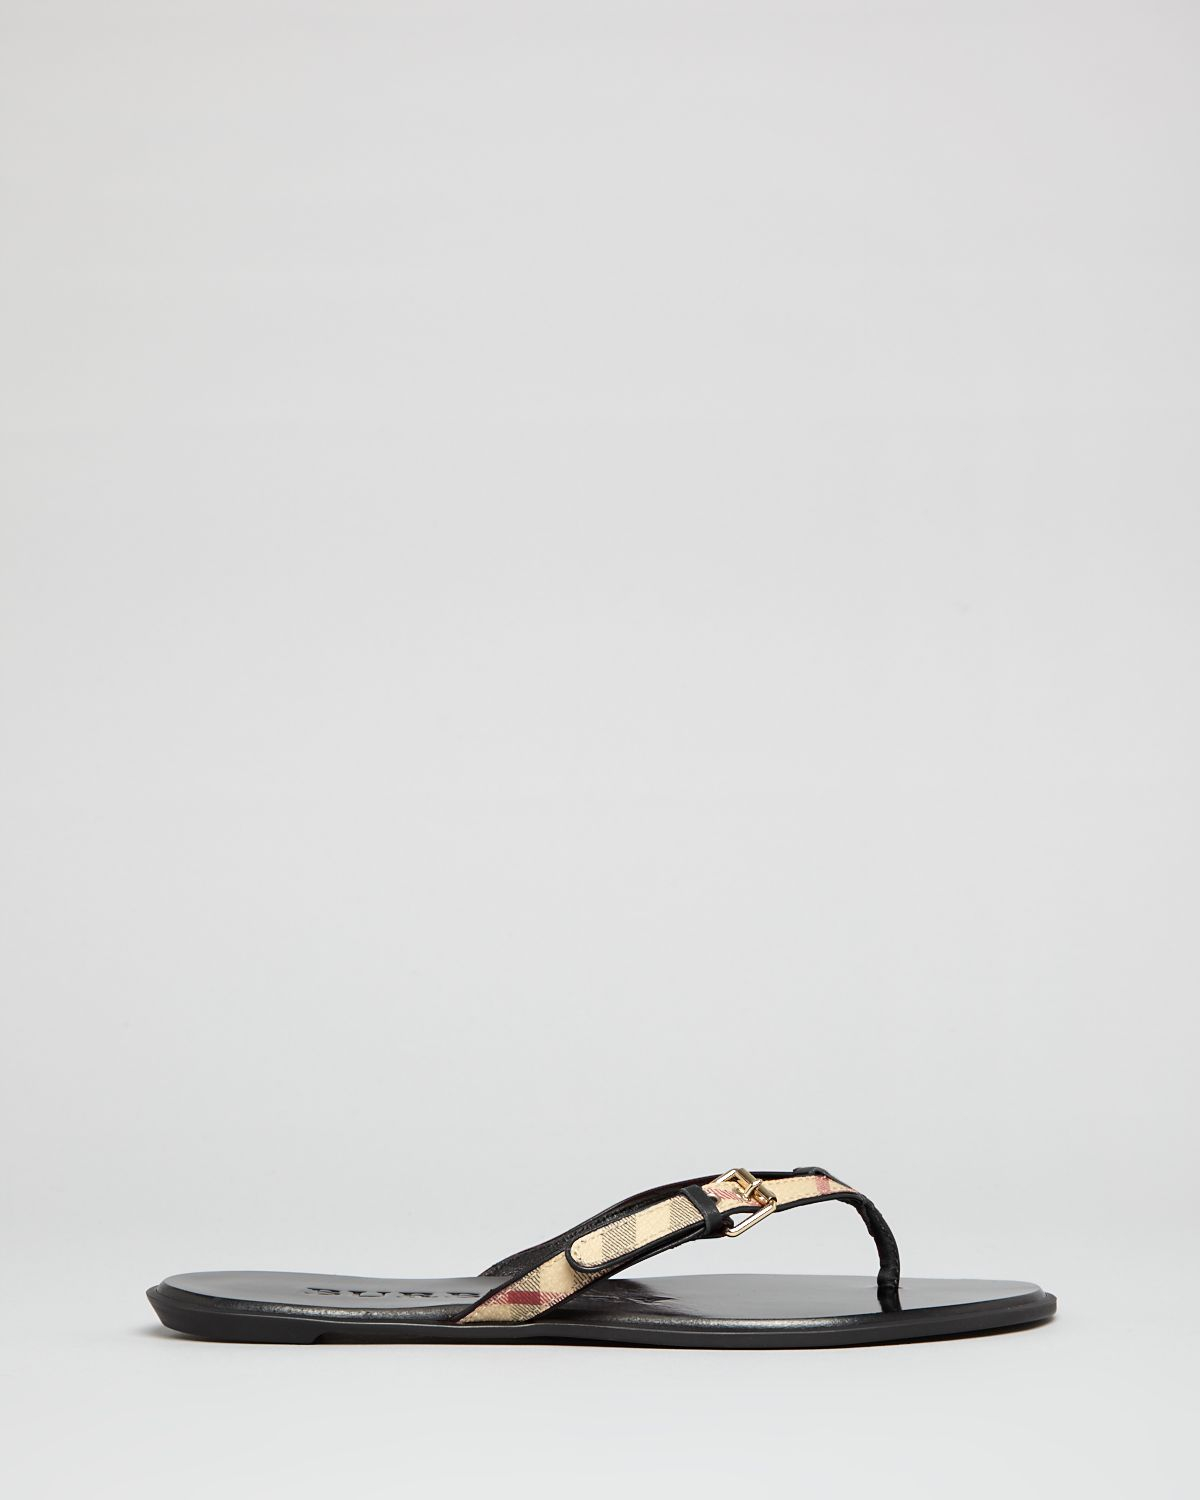 Burberry Flip Flop Sandals - Parsons Check Thong in Brown | Lyst